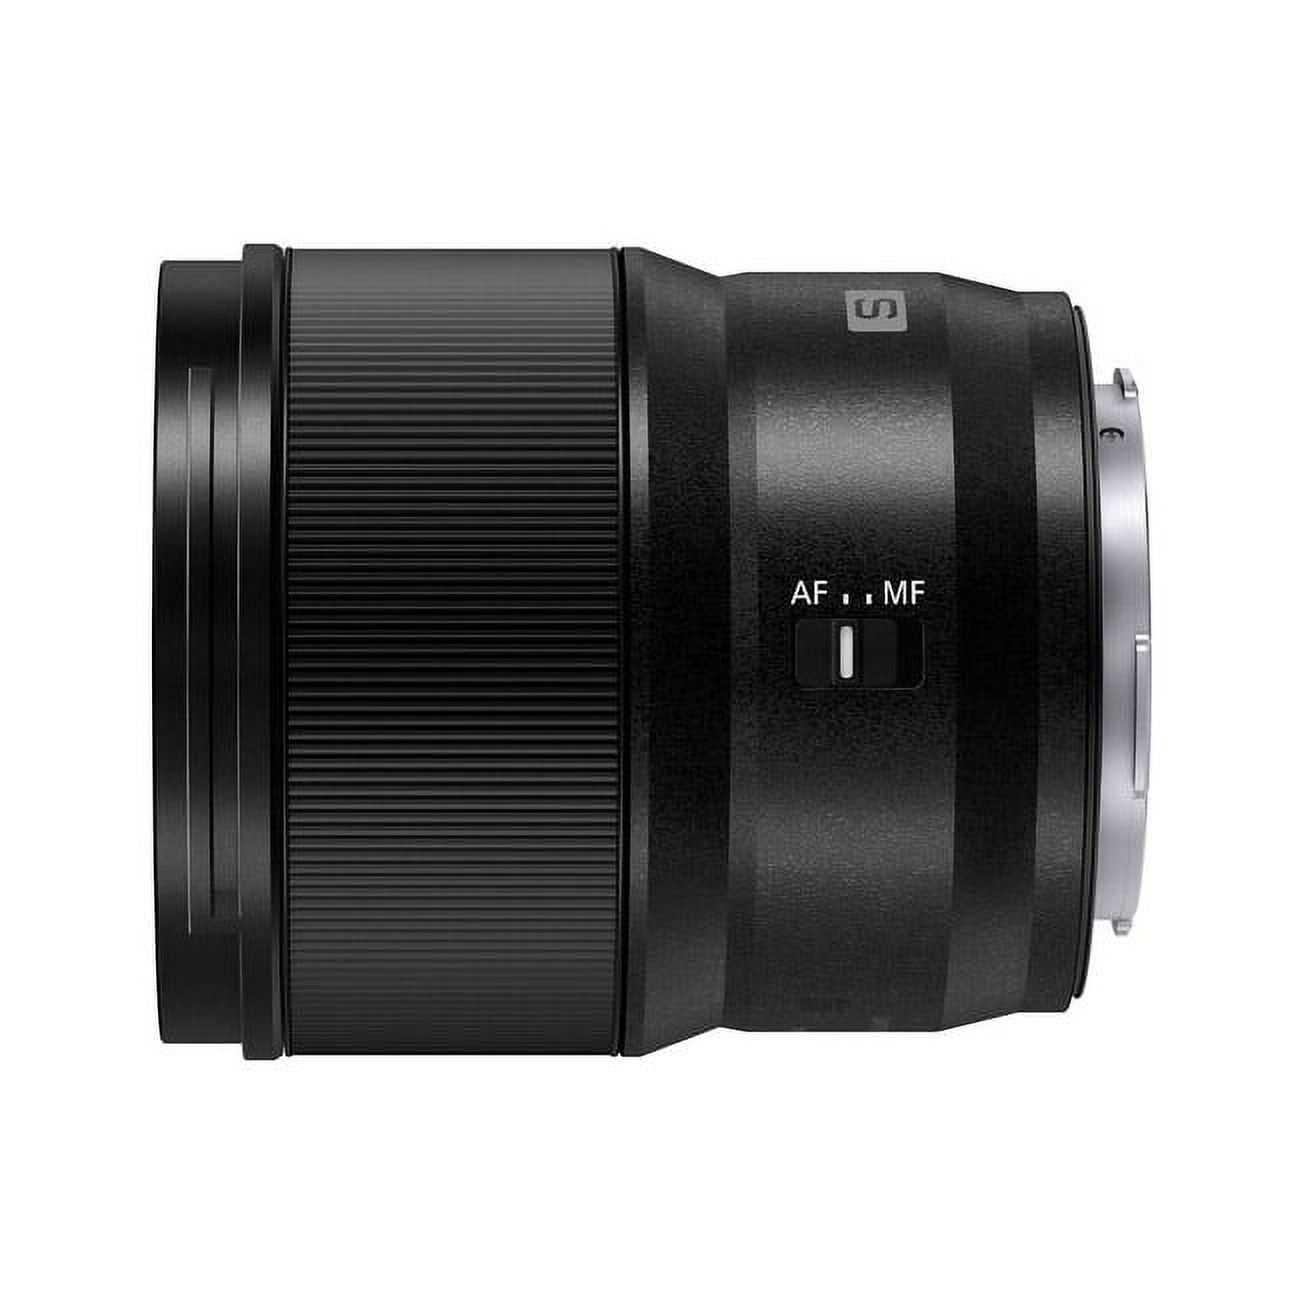 Panasonic LUMIX S 85mm F1.8 Lens for L-Mount Mirrorless Full Frame Cameras S-S85 - image 4 of 5